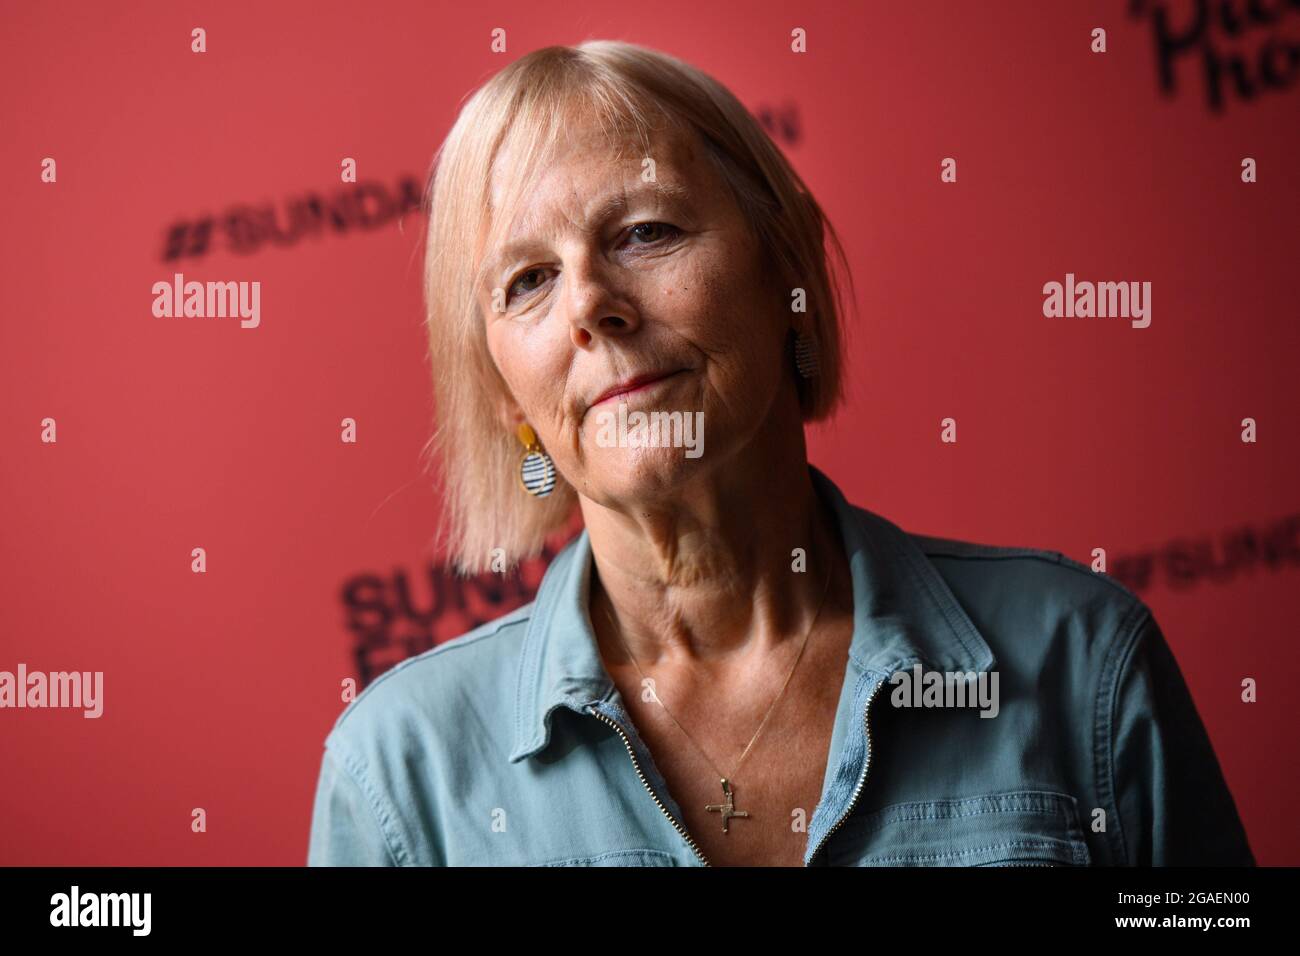 London, UK. 30 July 2021. Phyllida Lloyd pictured attending her masterclass as part of the Sundance Film Festival, at the Picturehouse Central cinema in London. Picture date: Friday July 30, 2021. Photo credit should read: Matt Crossick/Empics/Alamy Live News Stock Photo